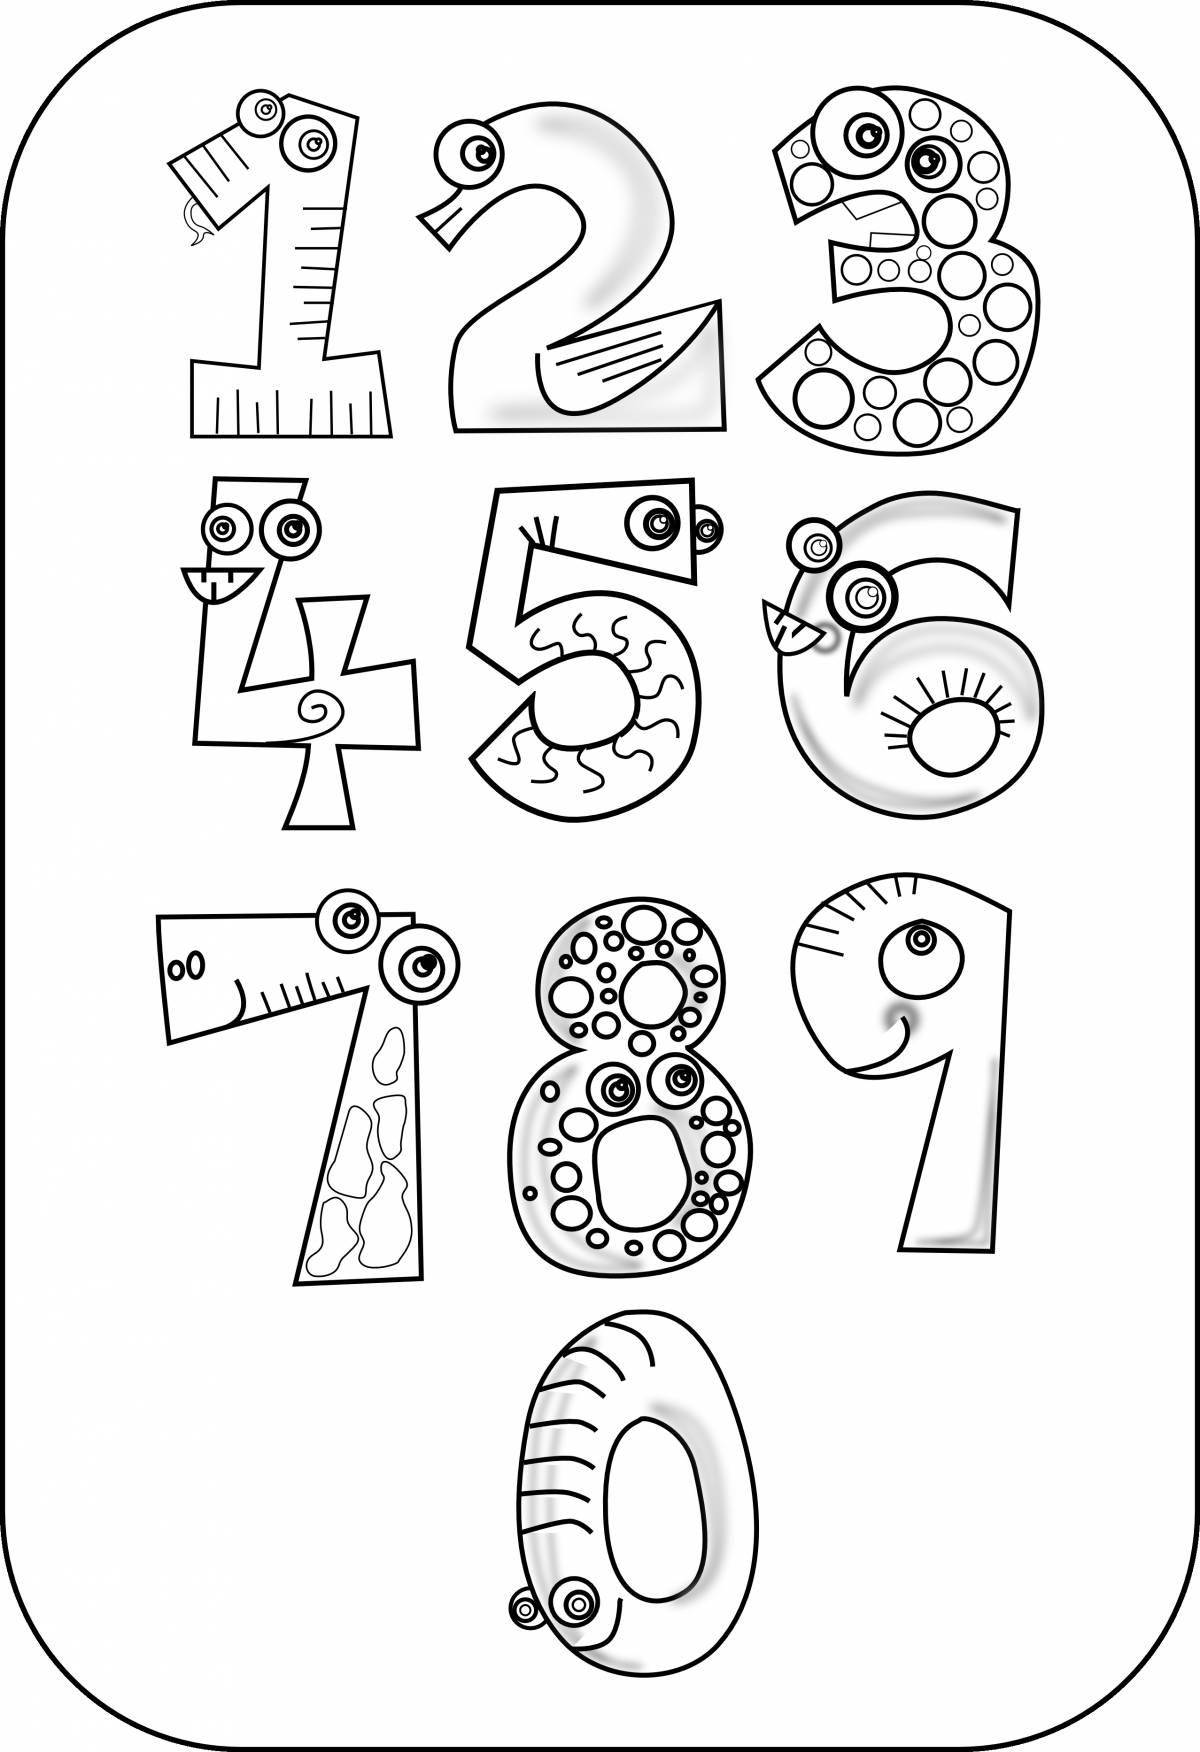 Coloring pages of animated figures